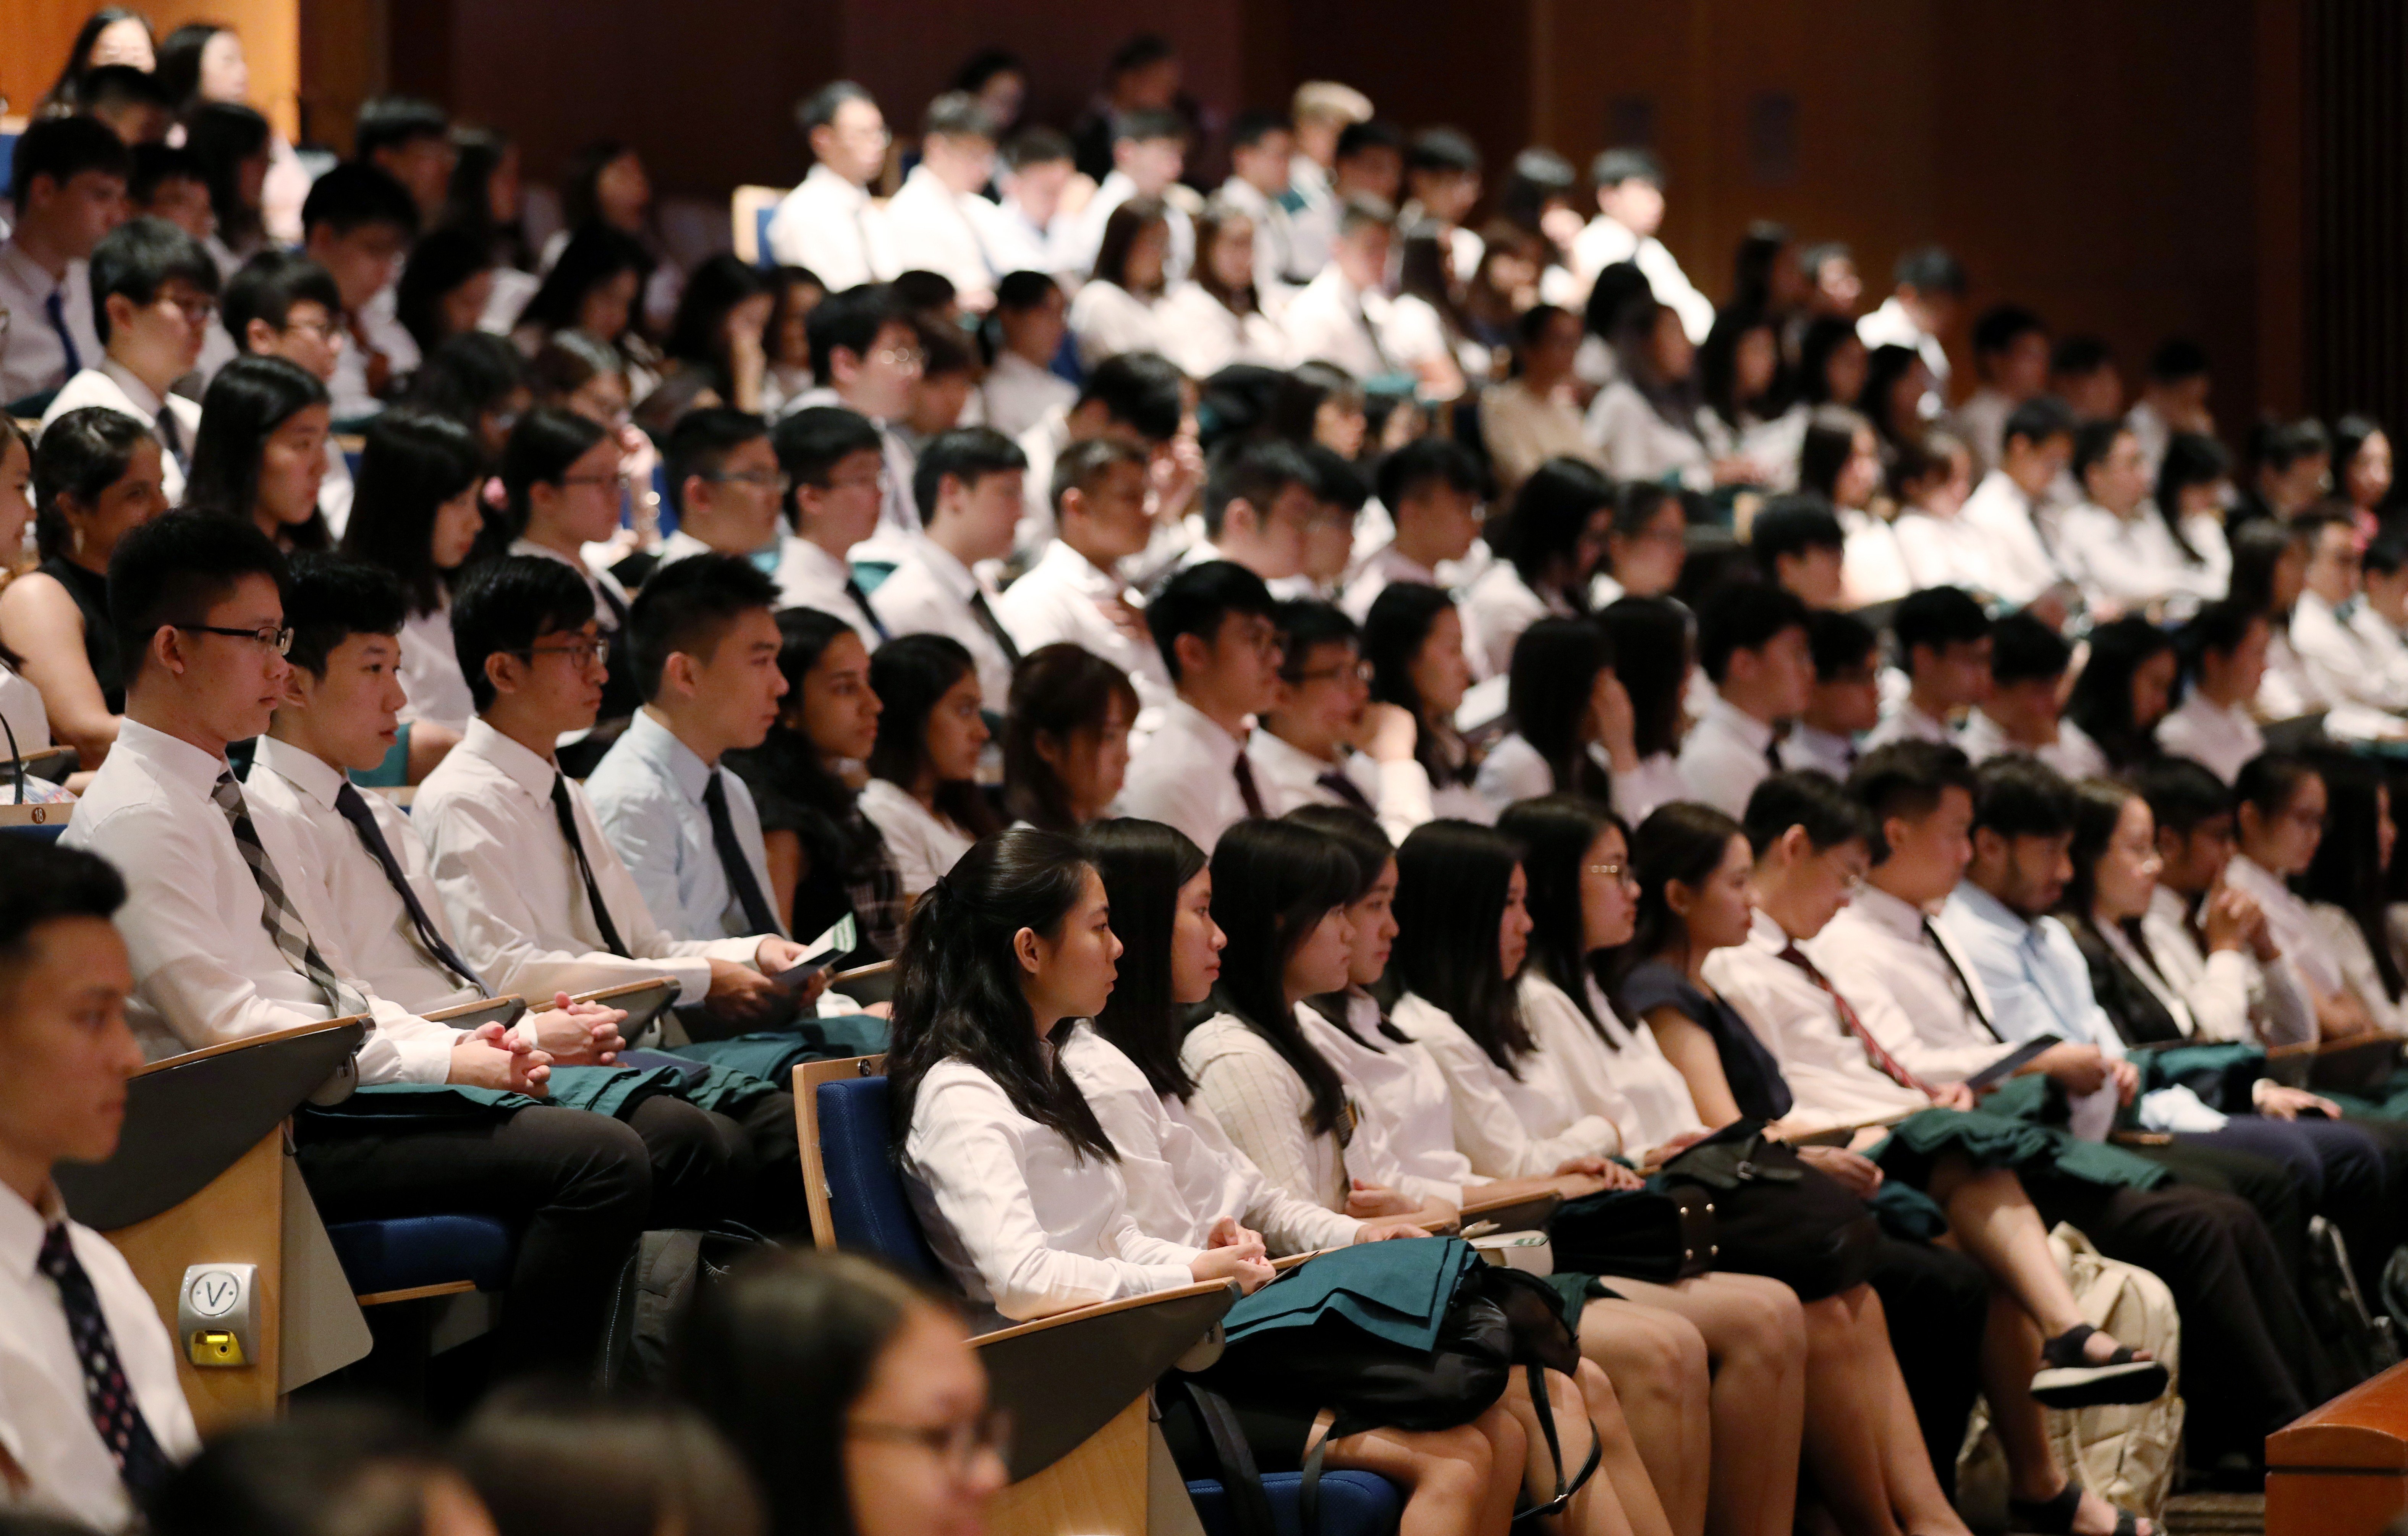 More international school students are considering Hong Kong for their undergraduatedegree alongside their overseas choices. Photo: Roy Issa/SCMP